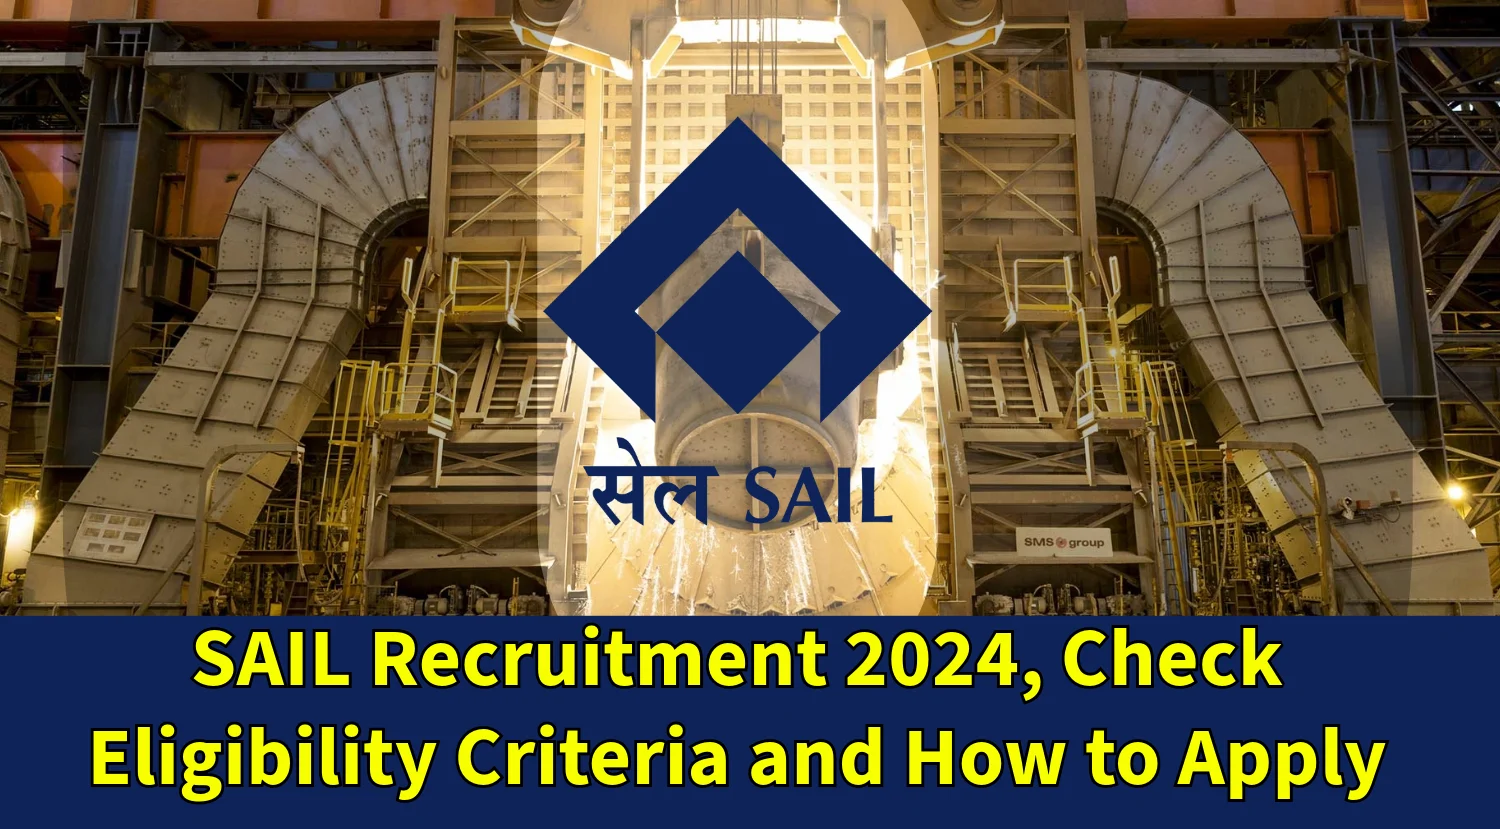 SAIL Recruitment 2024, Check Eligibility Criteria and How to Apply